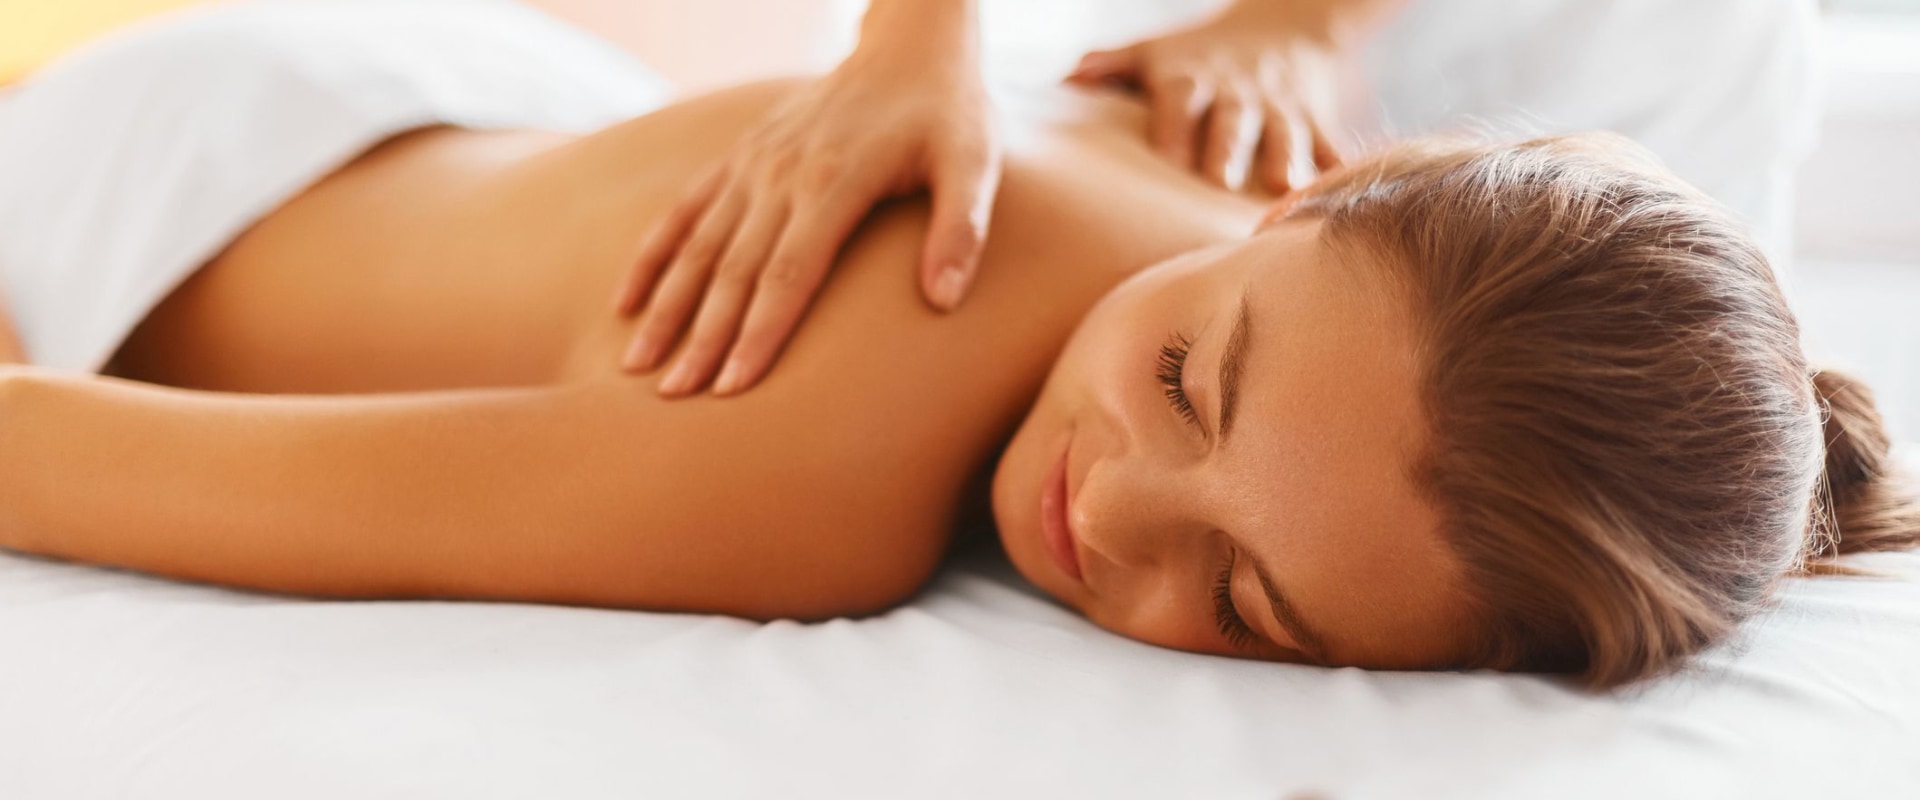 What type of treatment is massage?